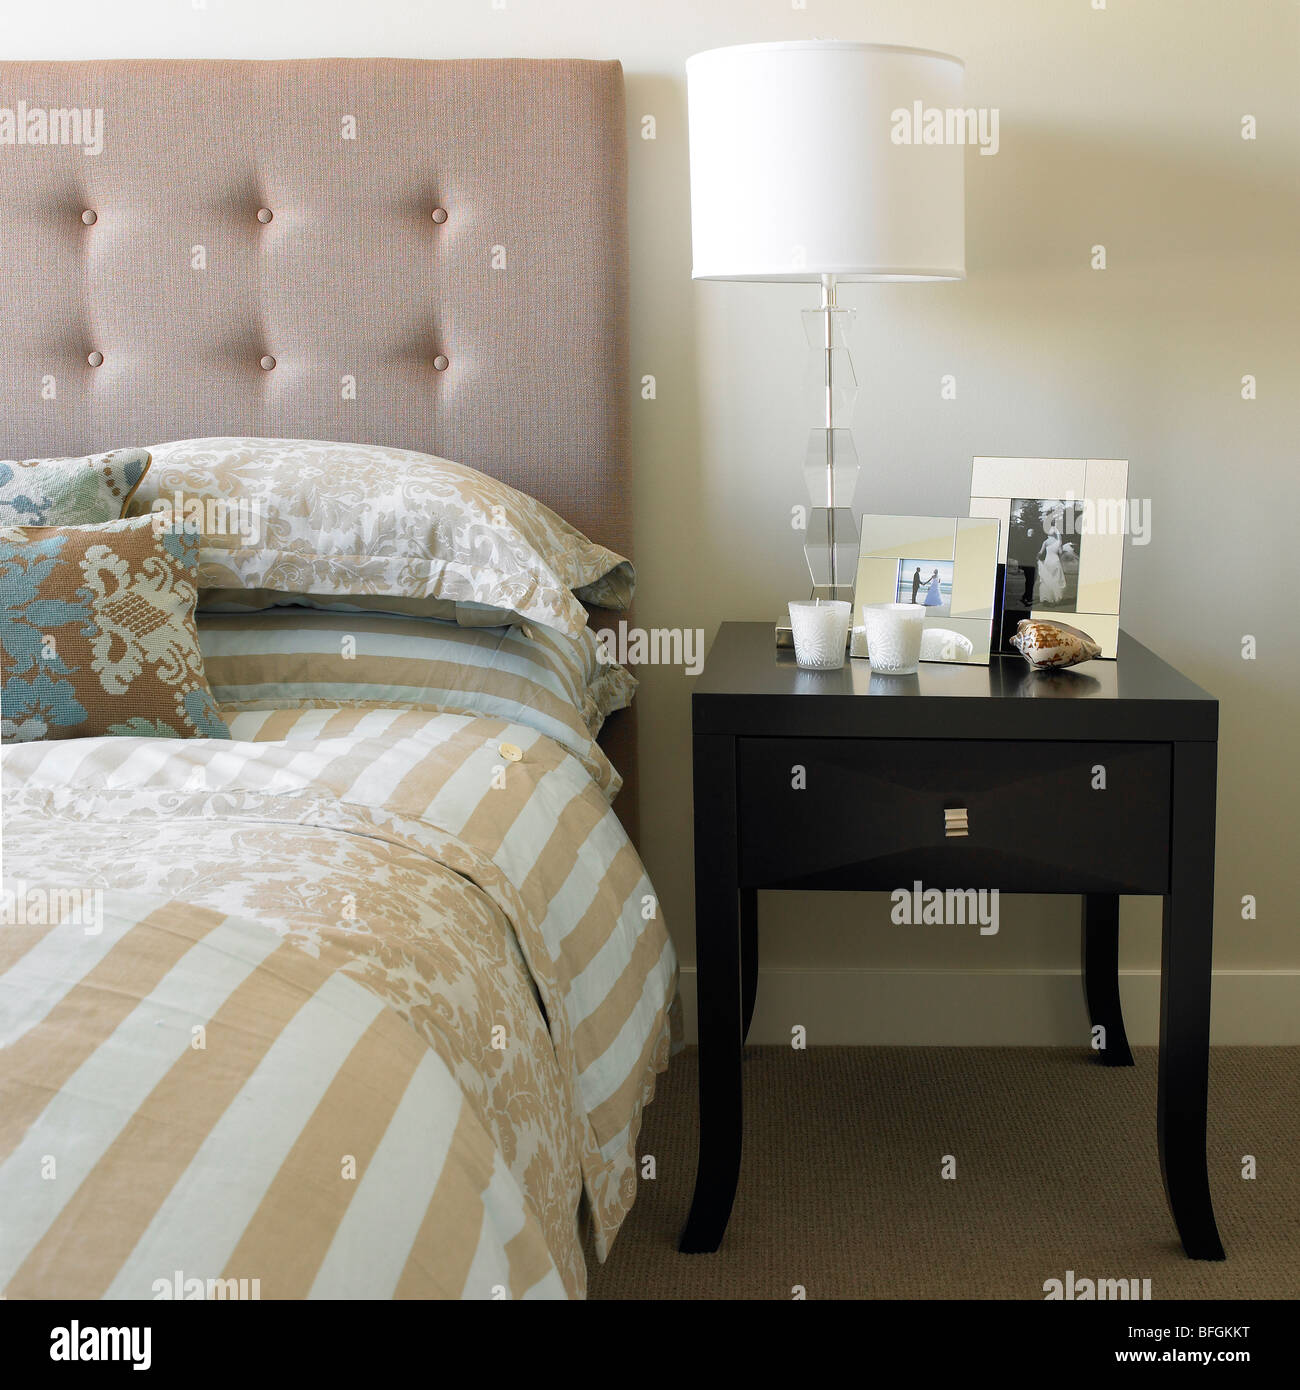 Bed with side table, candles, frames and lamp Stock Photo